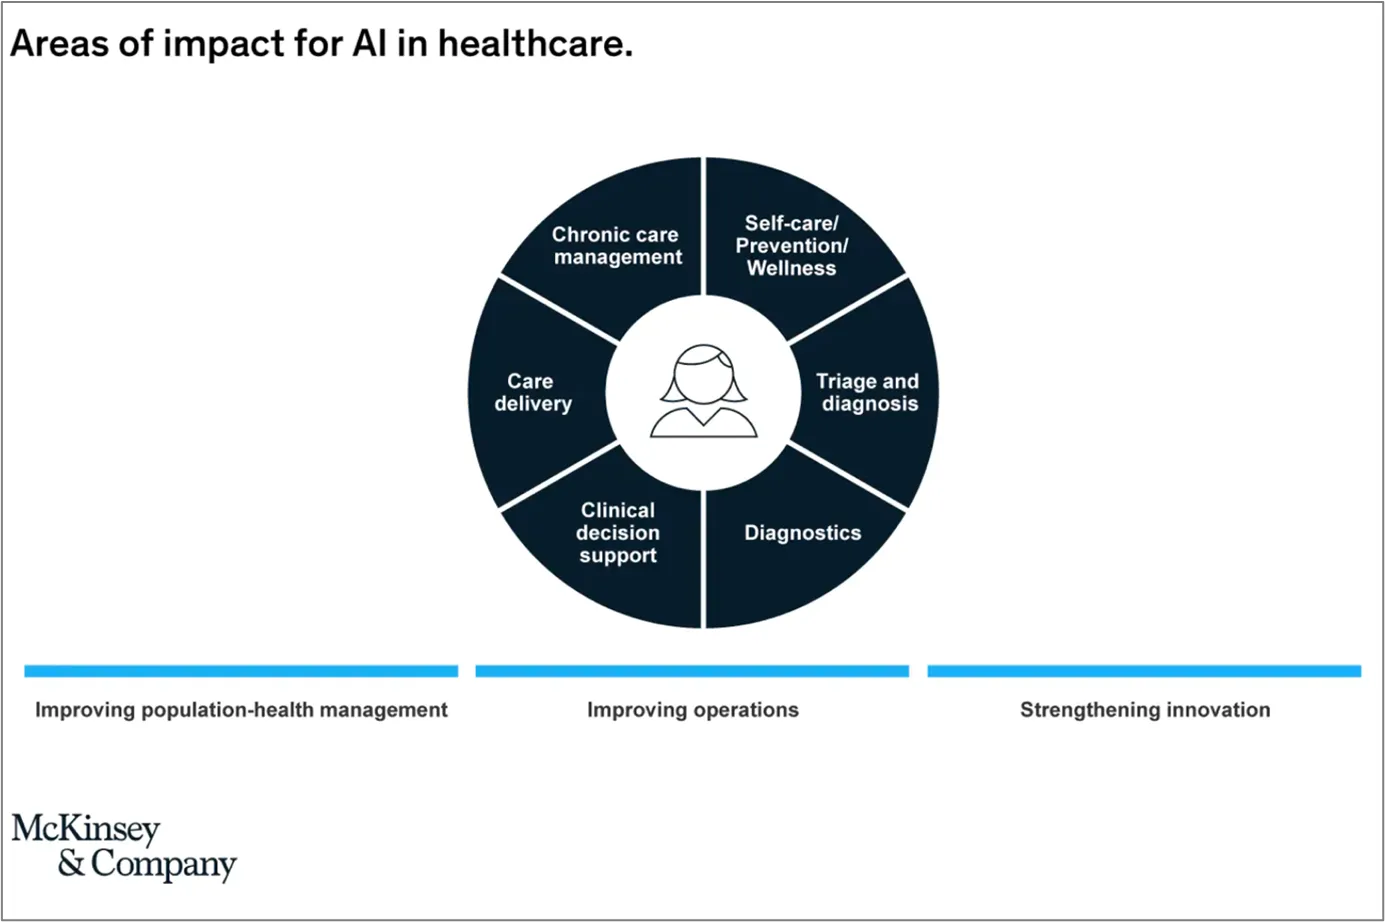 McKinsey & Co transforming healthcare with AI 2023